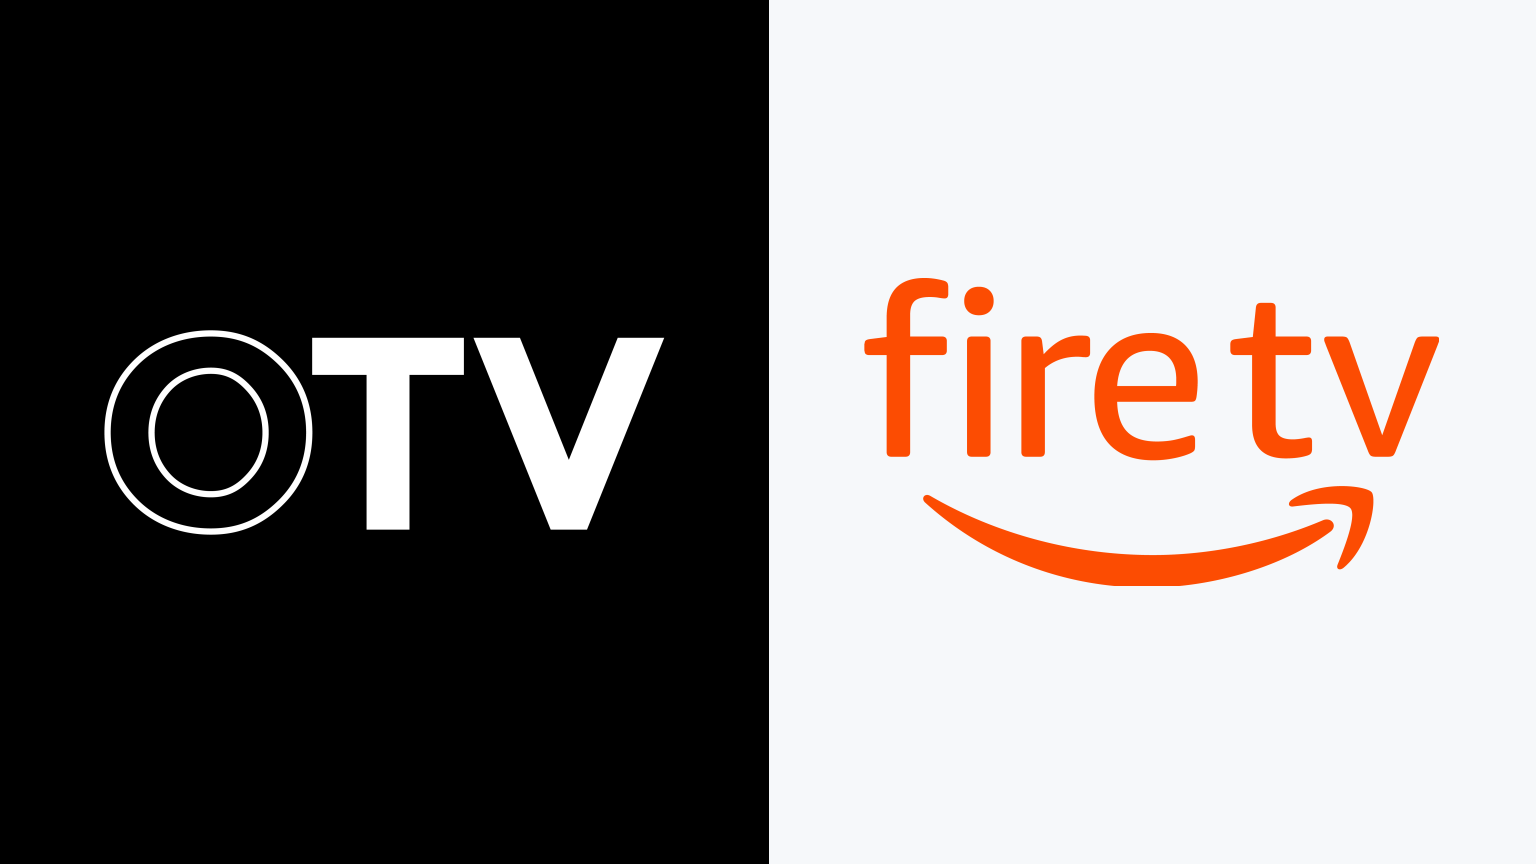 How to Watch Open Television on Amazon Fire TV The Streamable